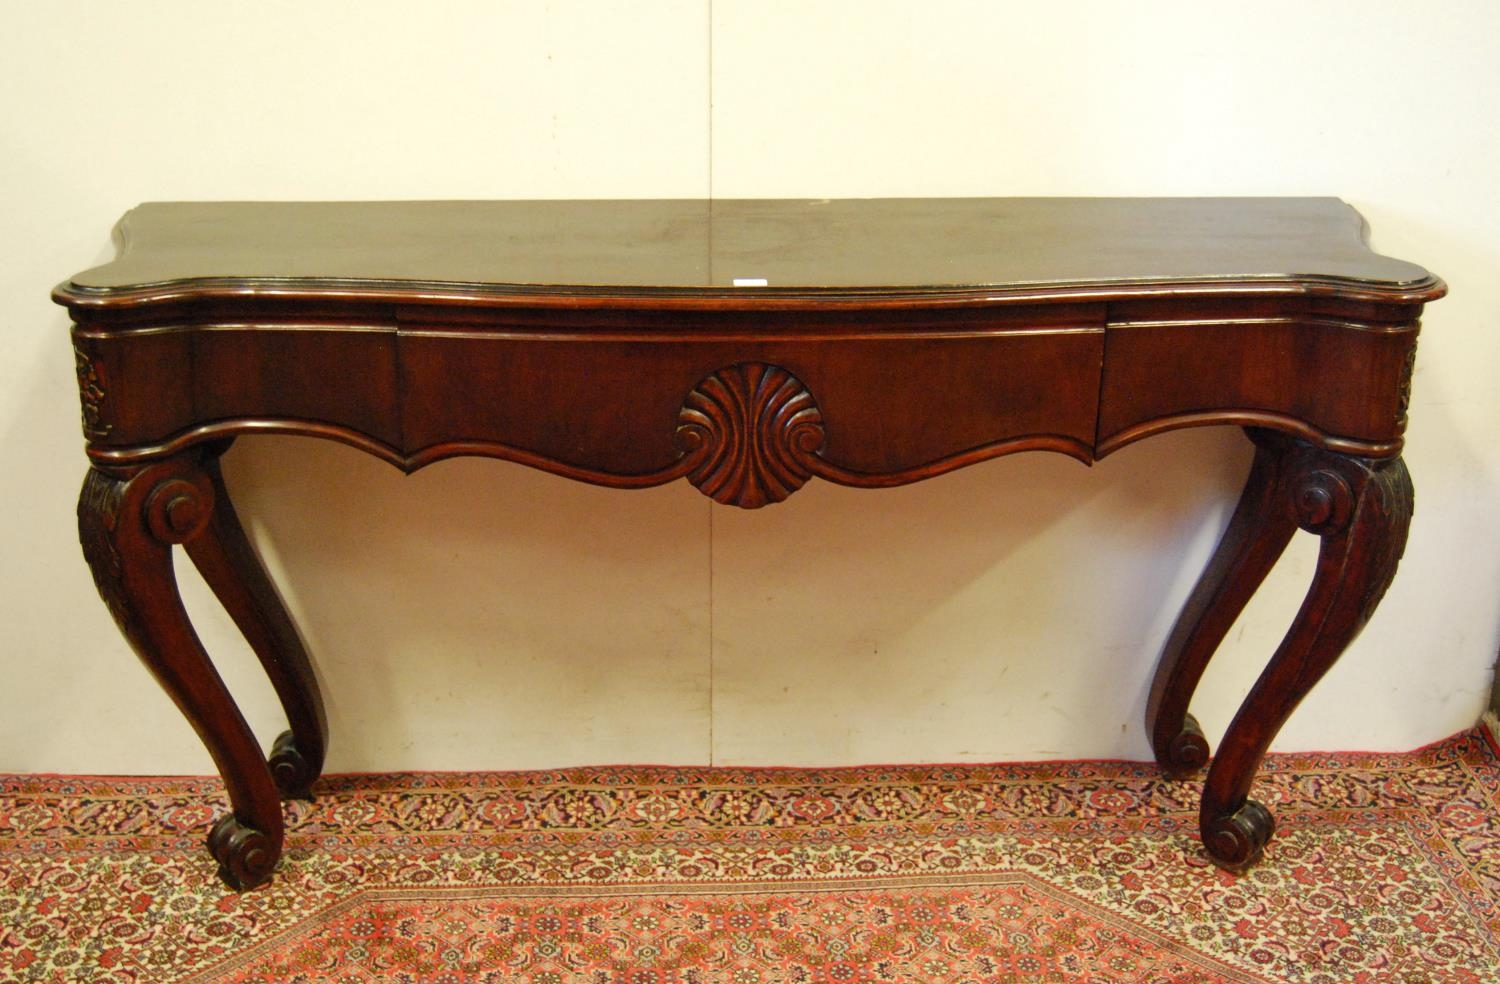 Victorian-style mahogany console table, the rectangular top with canted corners above a long